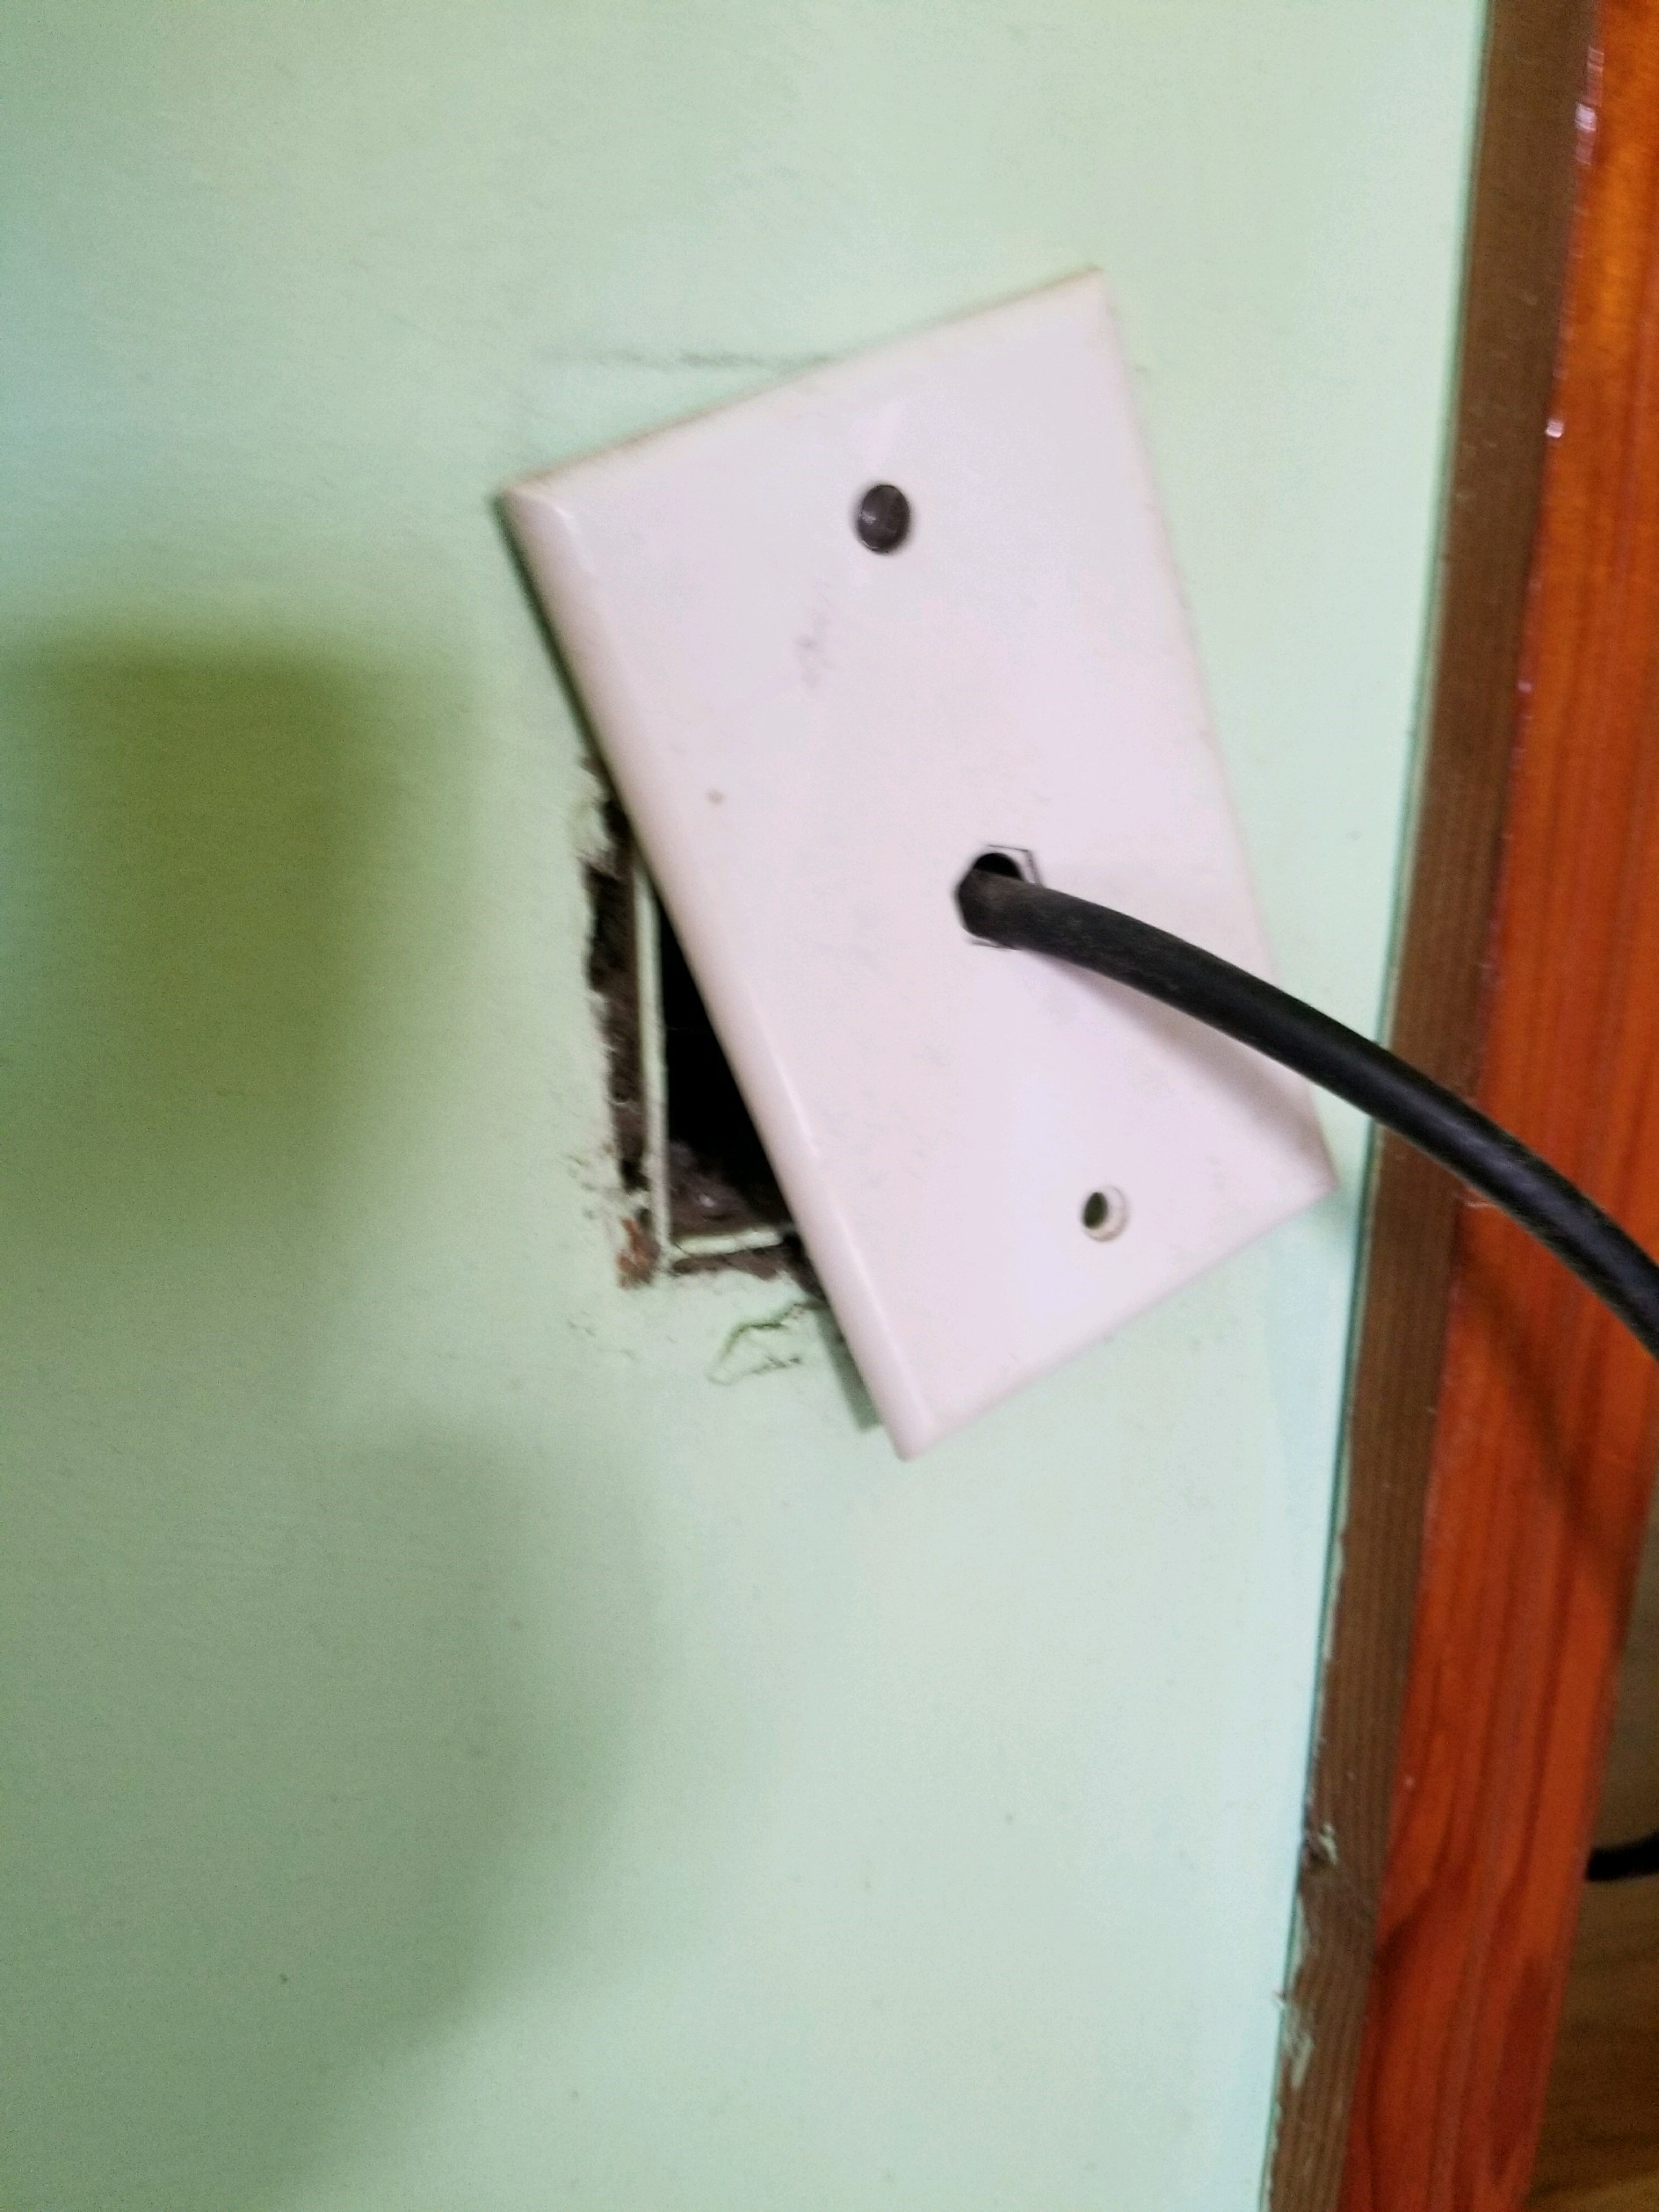 Unsecured Cable Receptical Cover - Barnesville, GA